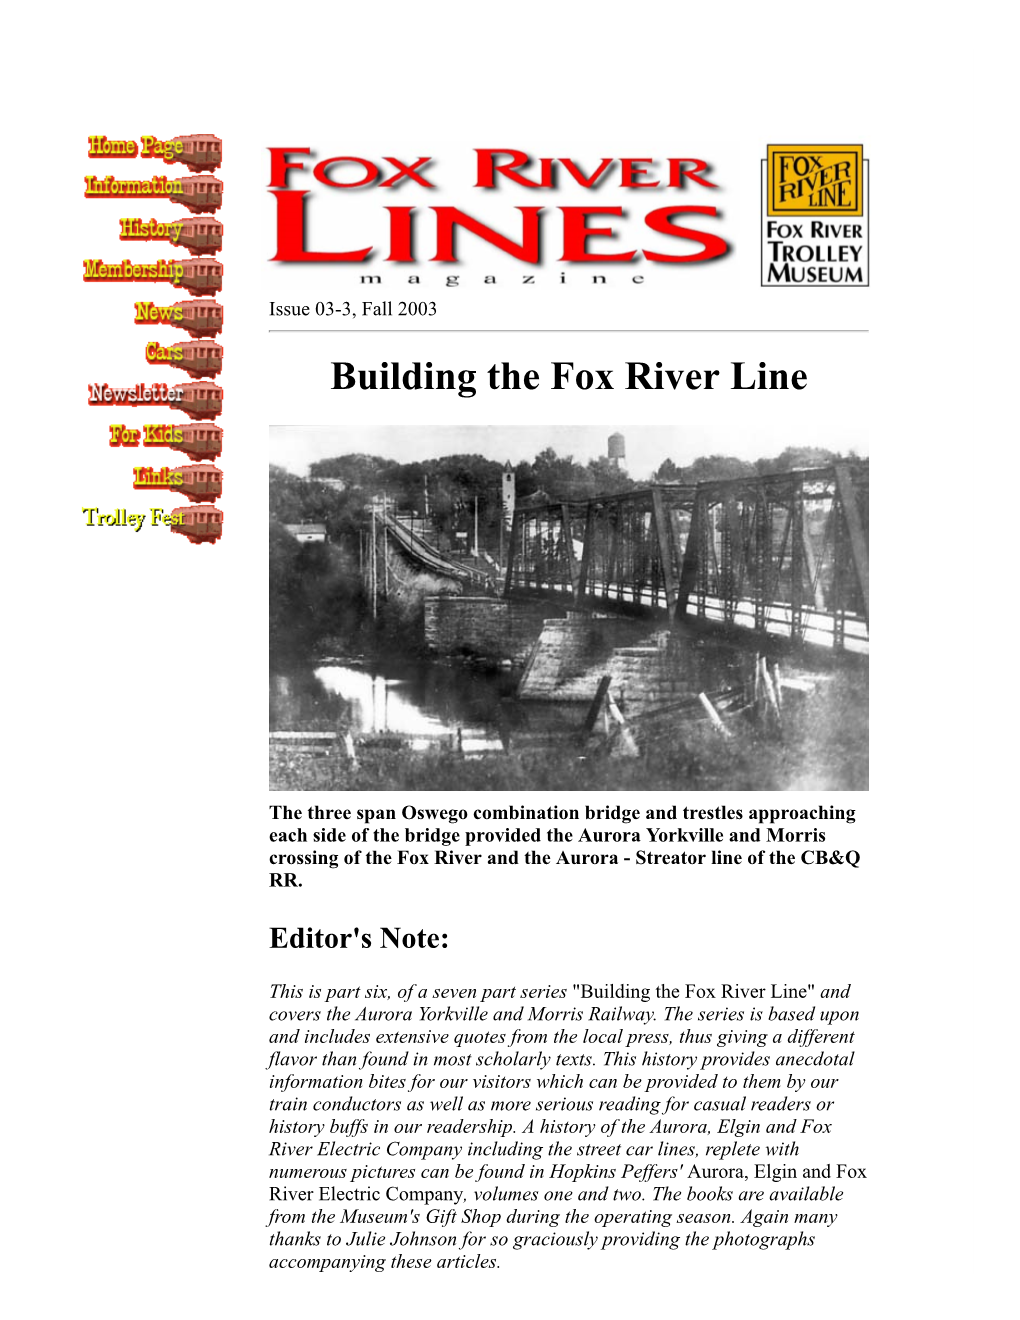 Building the Fox River Line